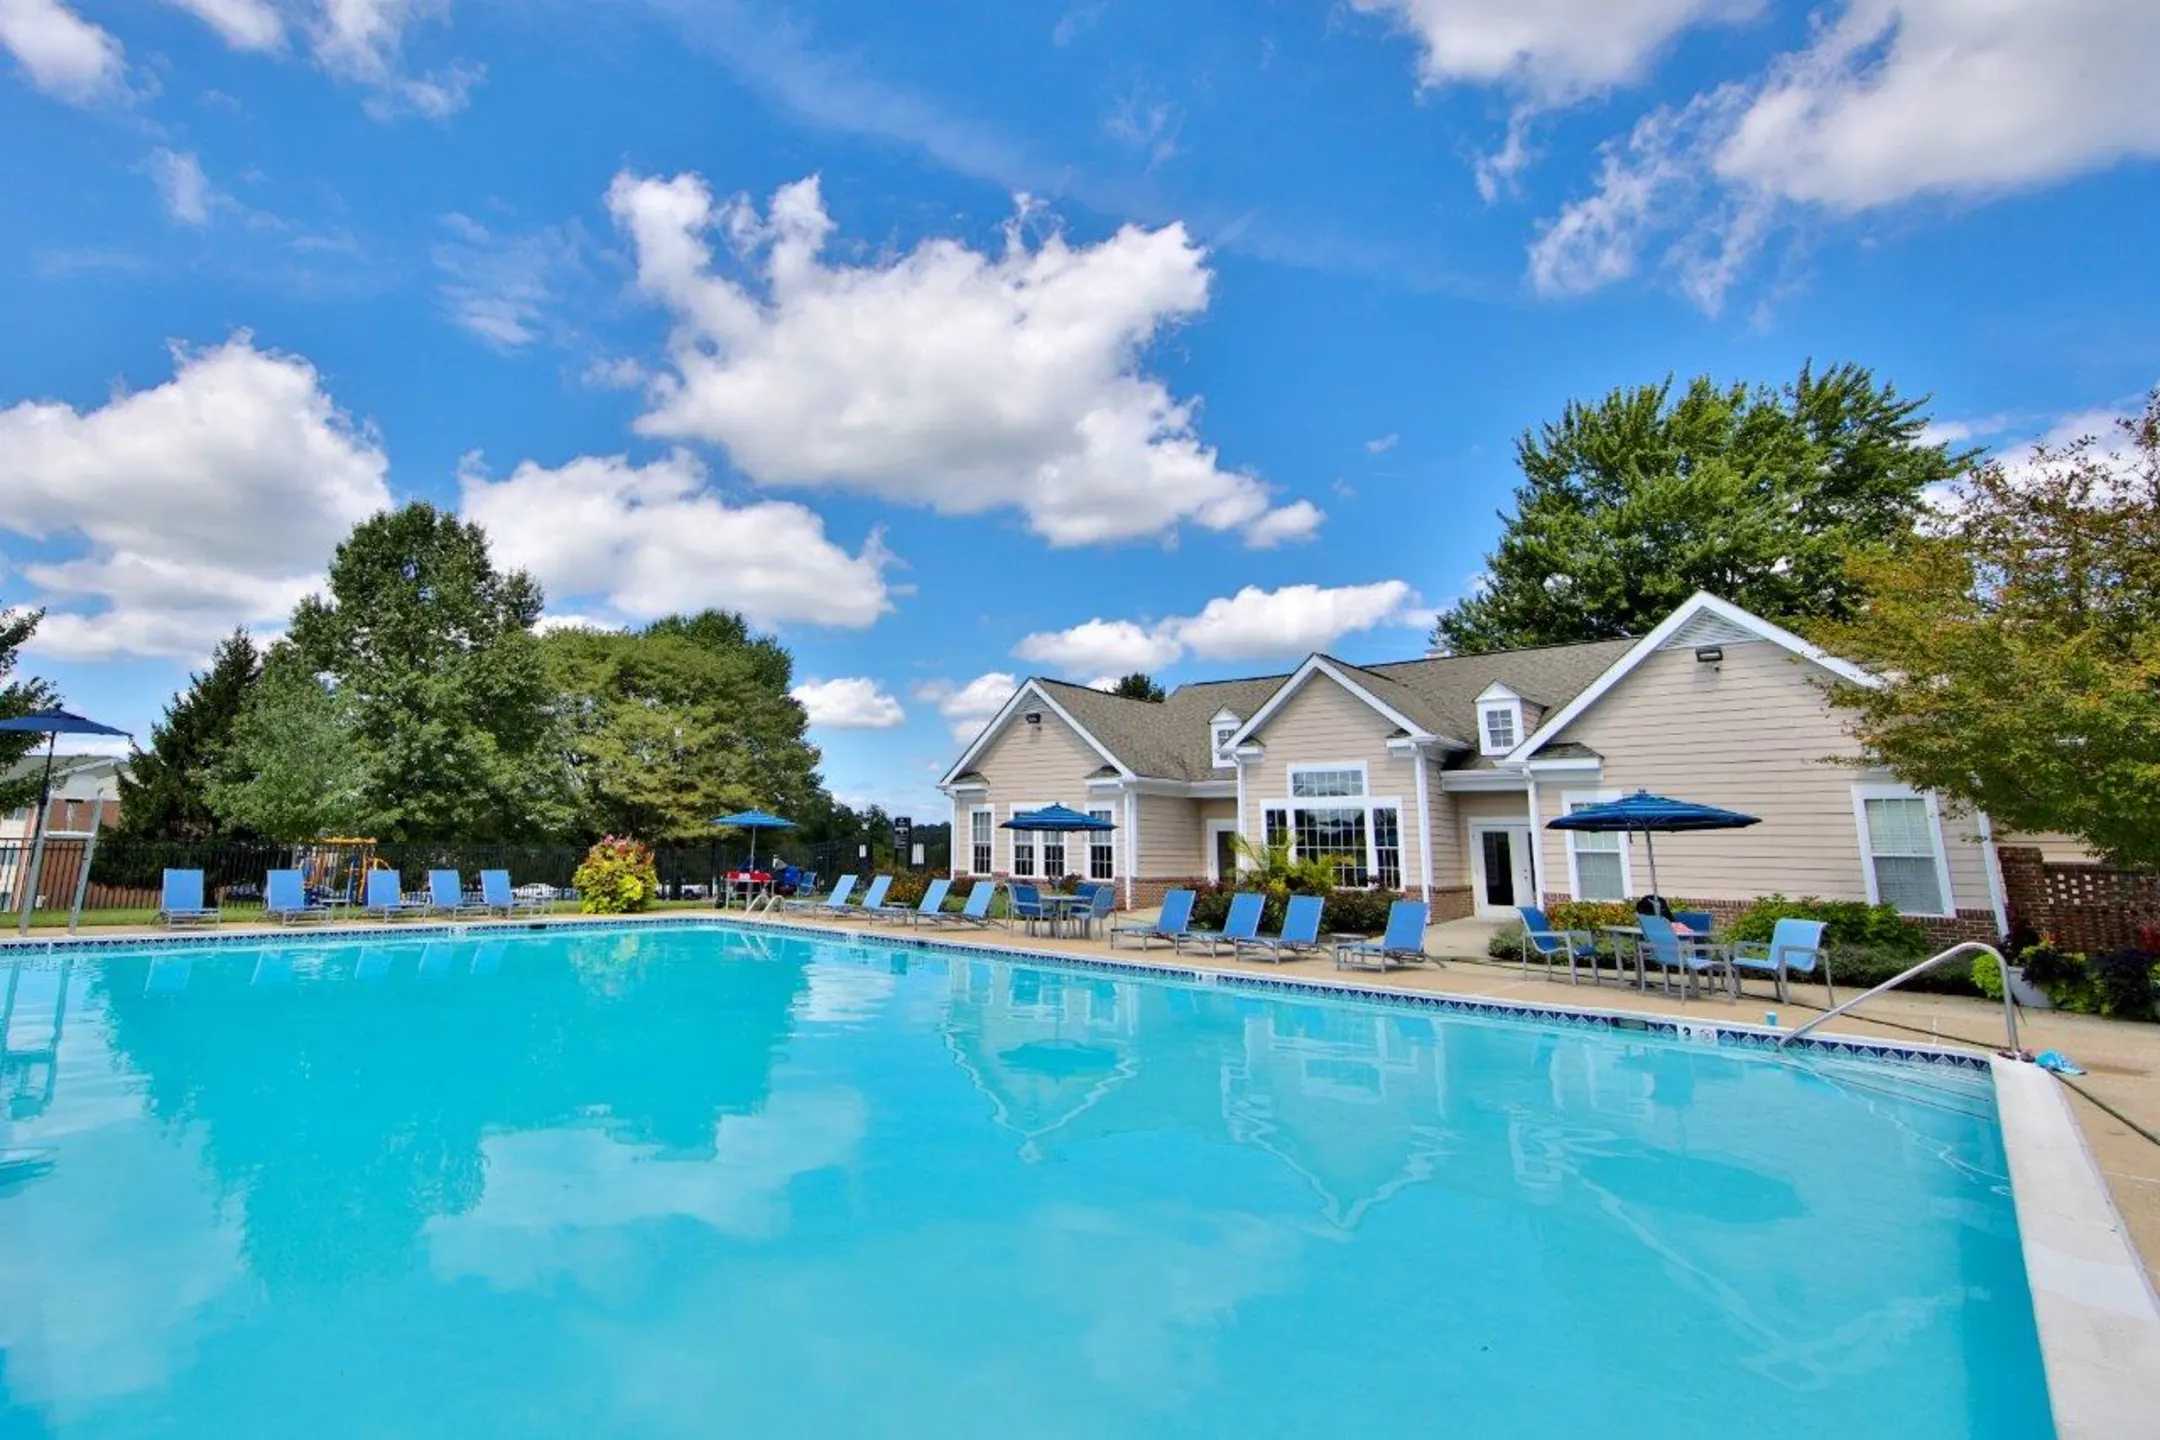 Pool - Westerlee Apartment Homes - Catonsville, MD